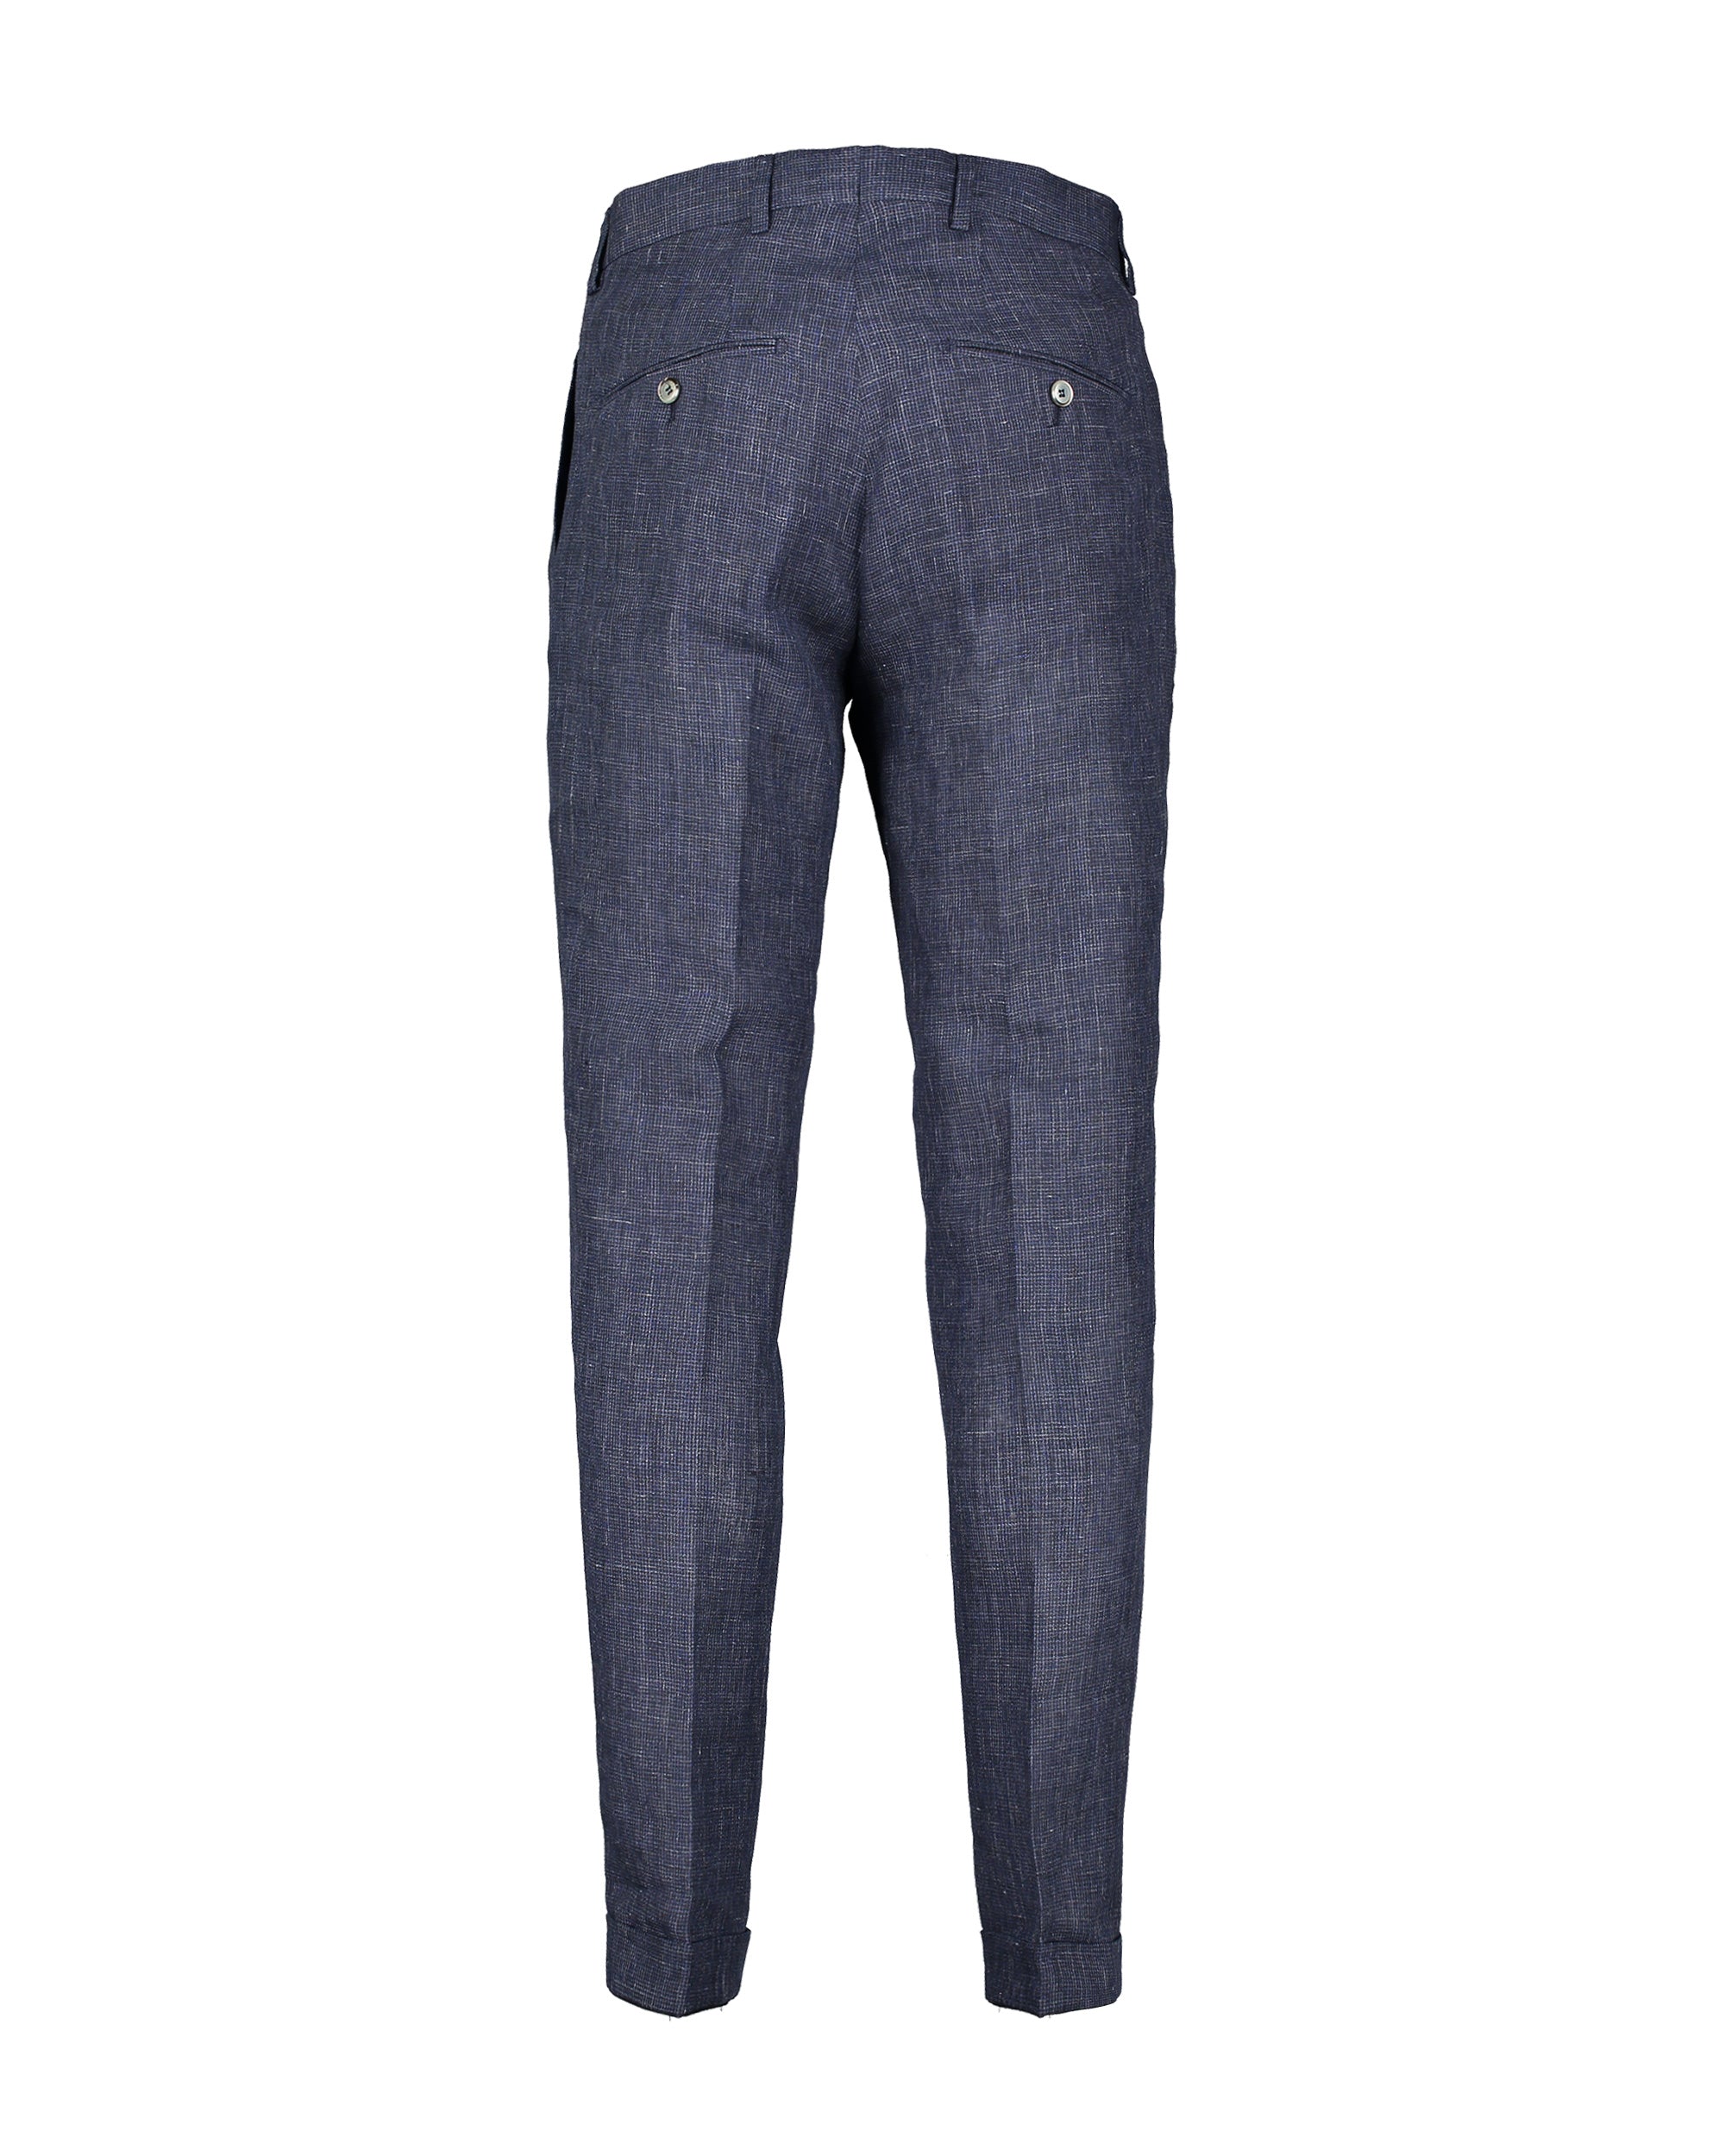 Alex Navy Houndstooth Linen Trousers